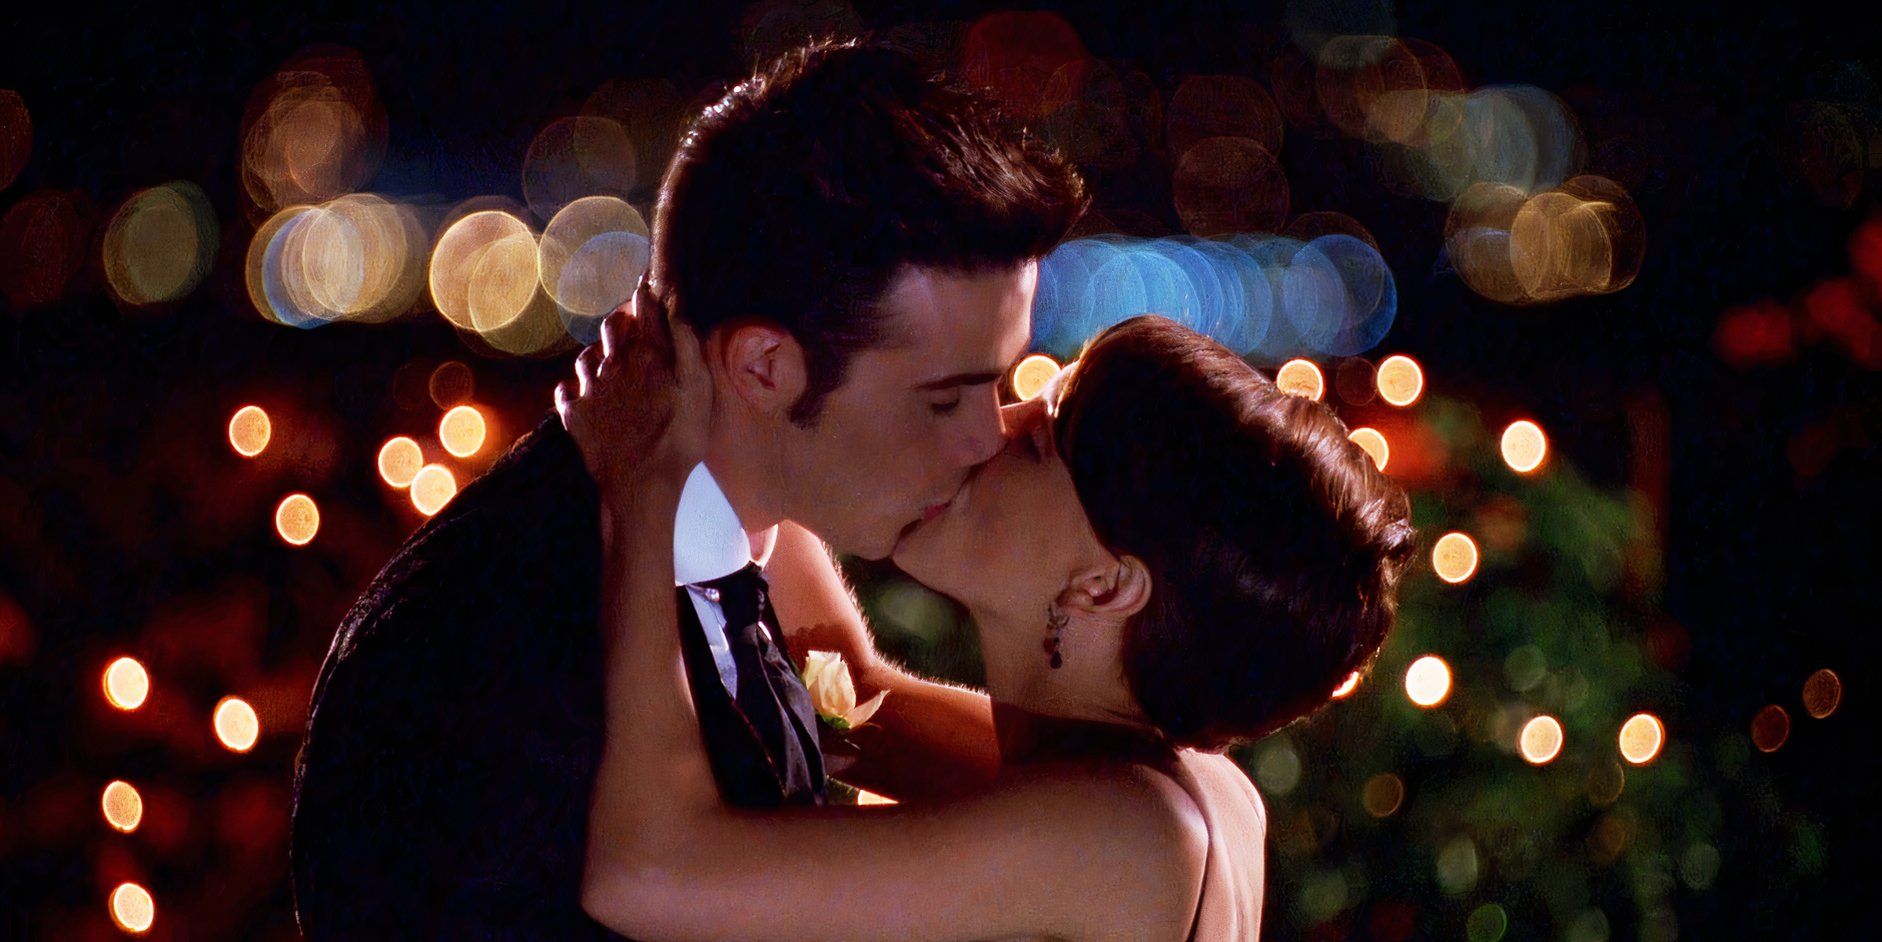 She's All That Zack and Laney kissing on prom night